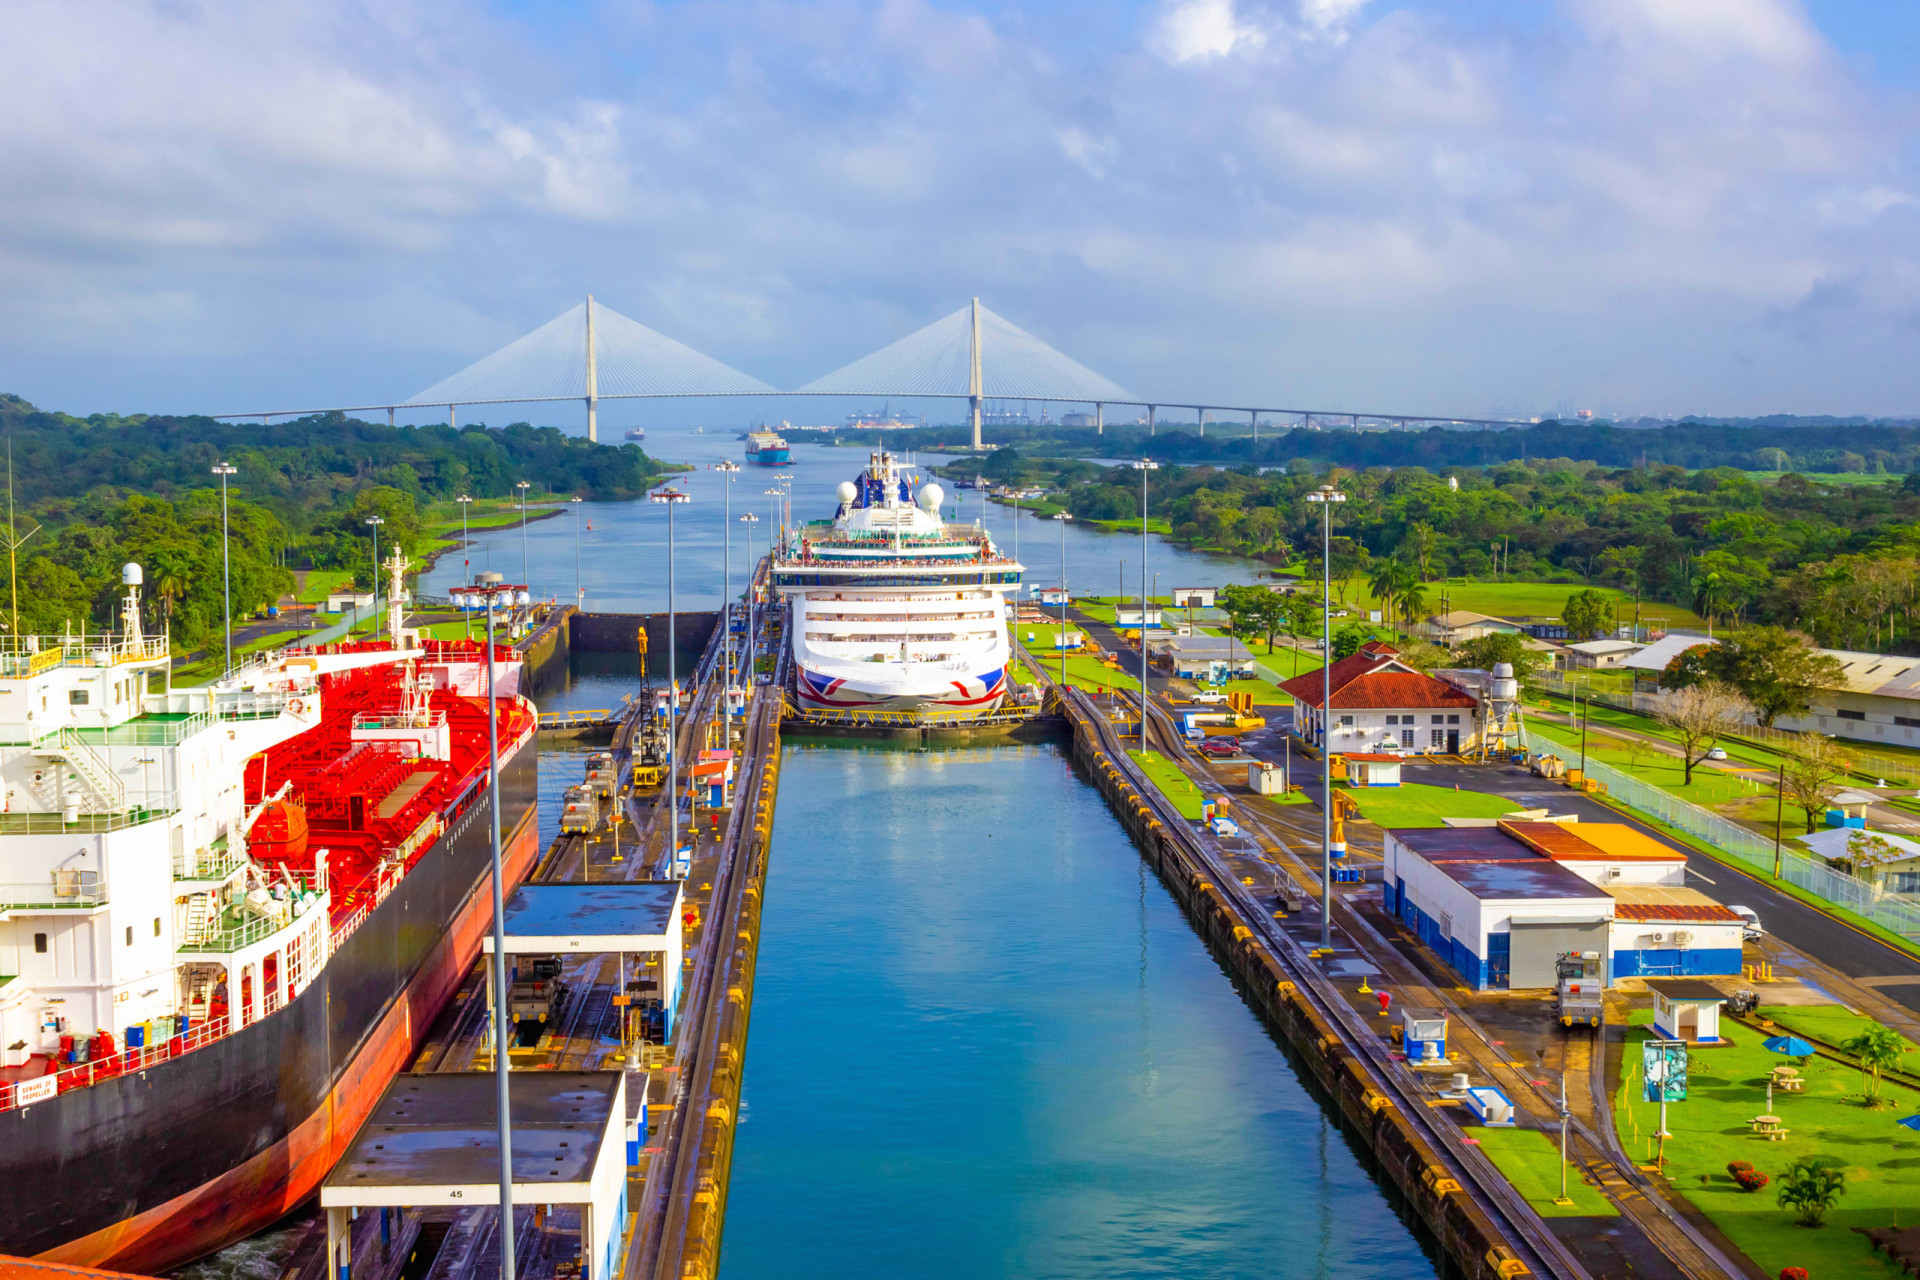 <p>The easiest way to visit the Panama Canal is to head to the Miraflores Visitors Center, just outside Panama City. Here you can marvel at one of the most incredible feats of civil engineering undertaken in modern human history.</p>